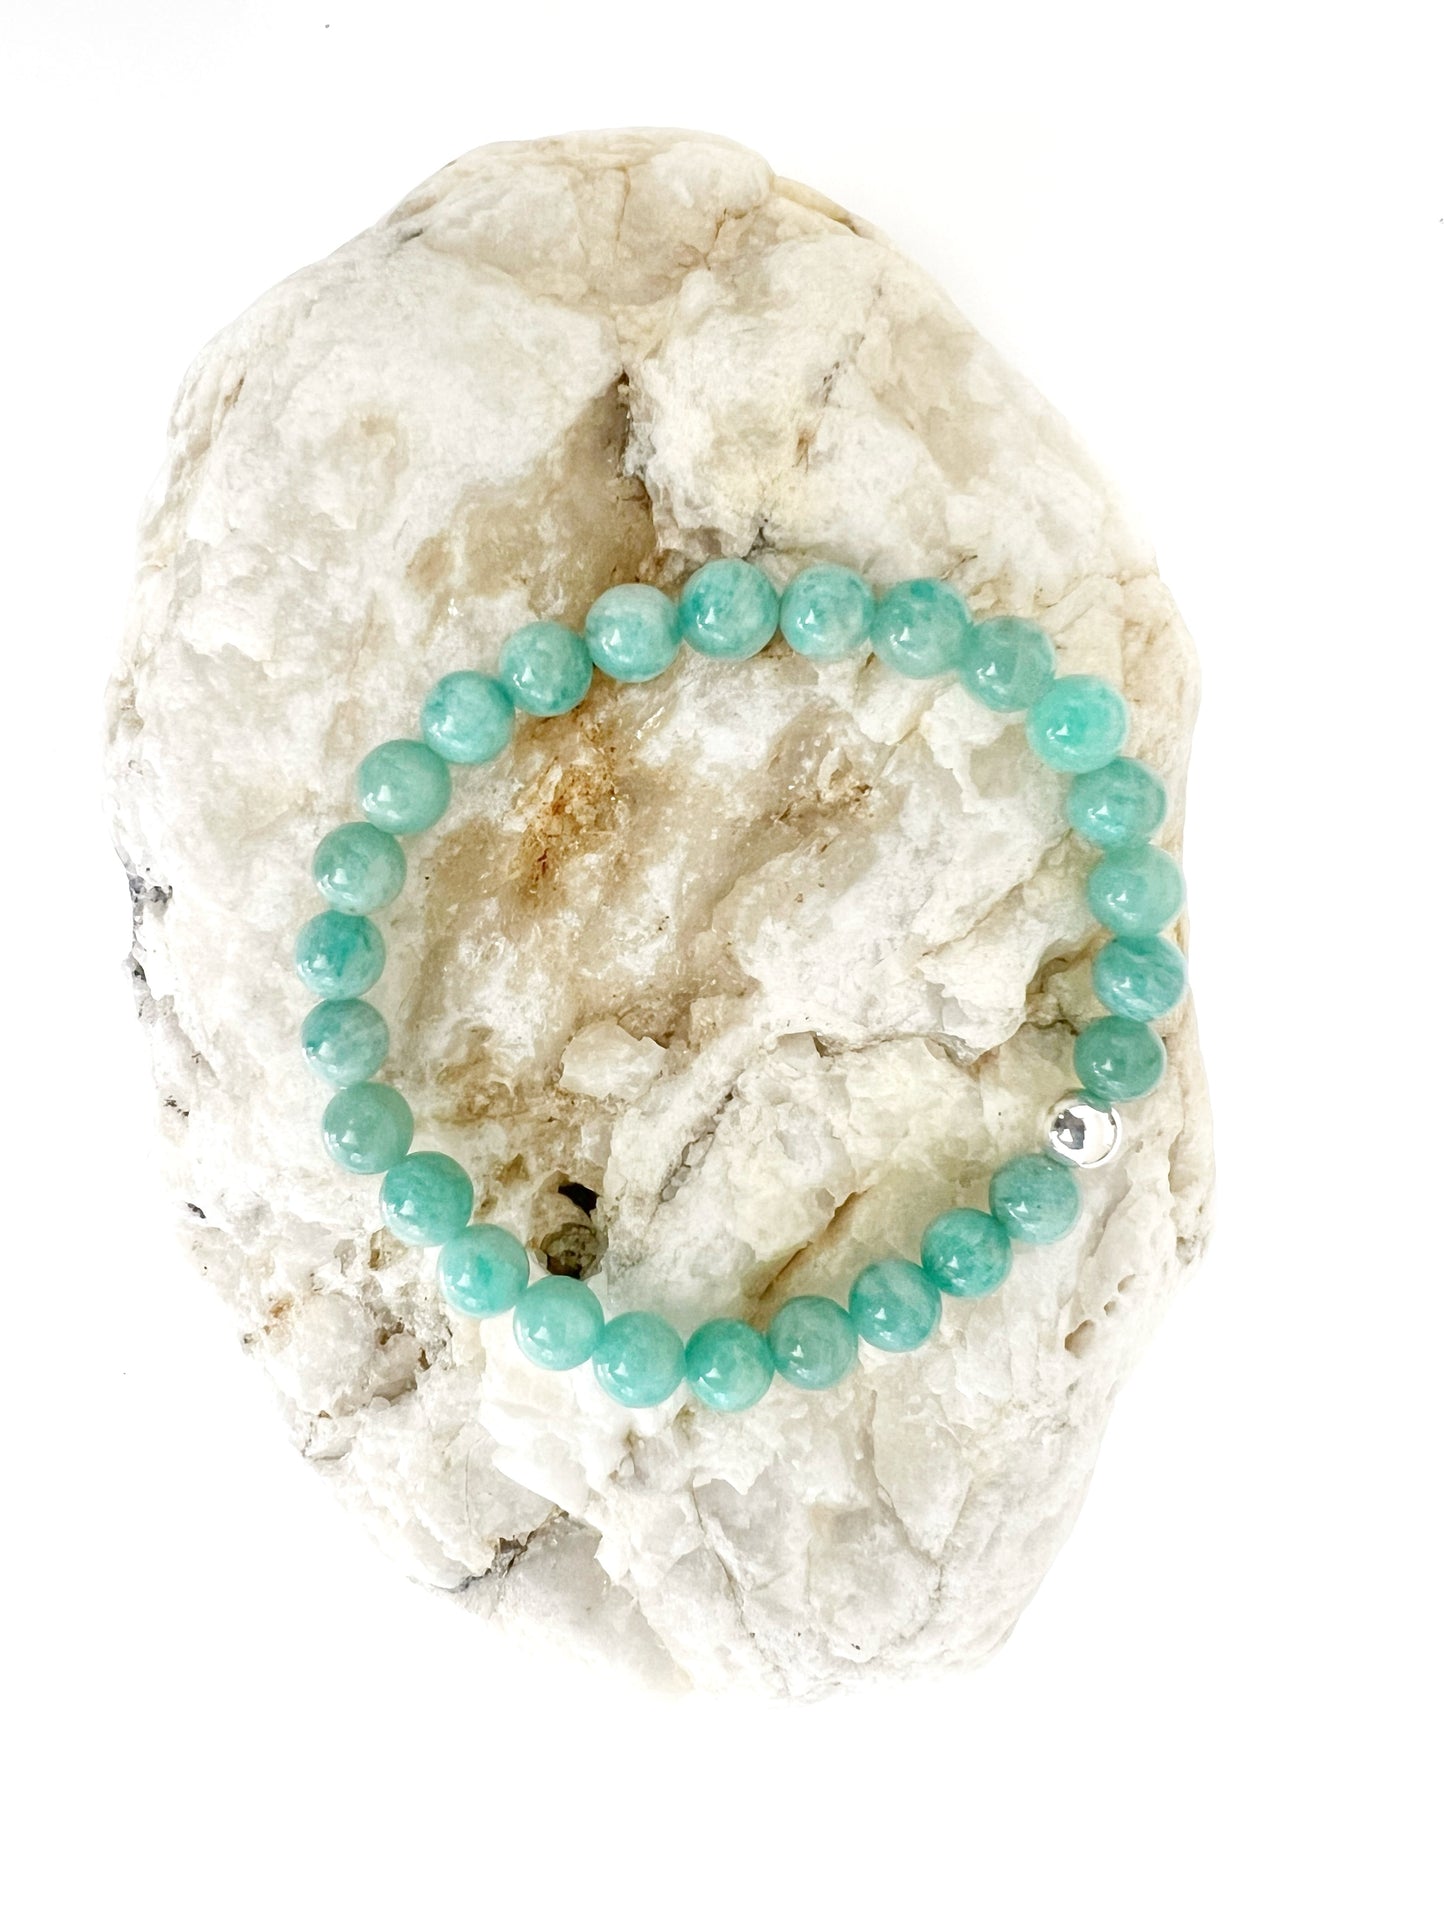 Simple Amazonite stretch bracelet with one Sterling Silver bead on a brownish rock with a white background